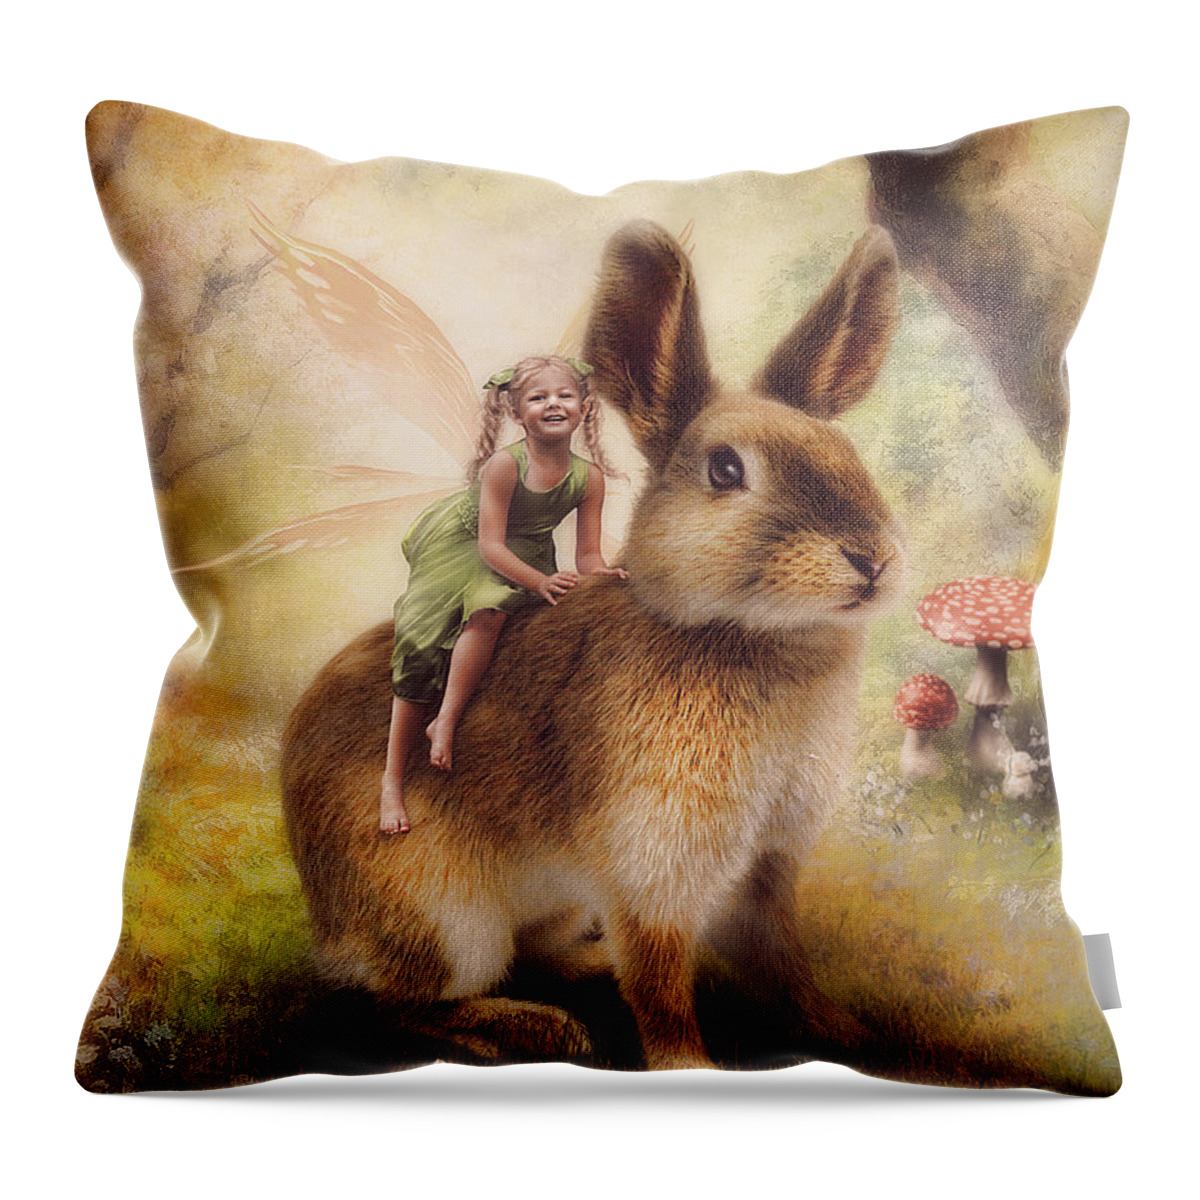 Happy Easter Throw Pillow by Cindy Grundsten - Pixels